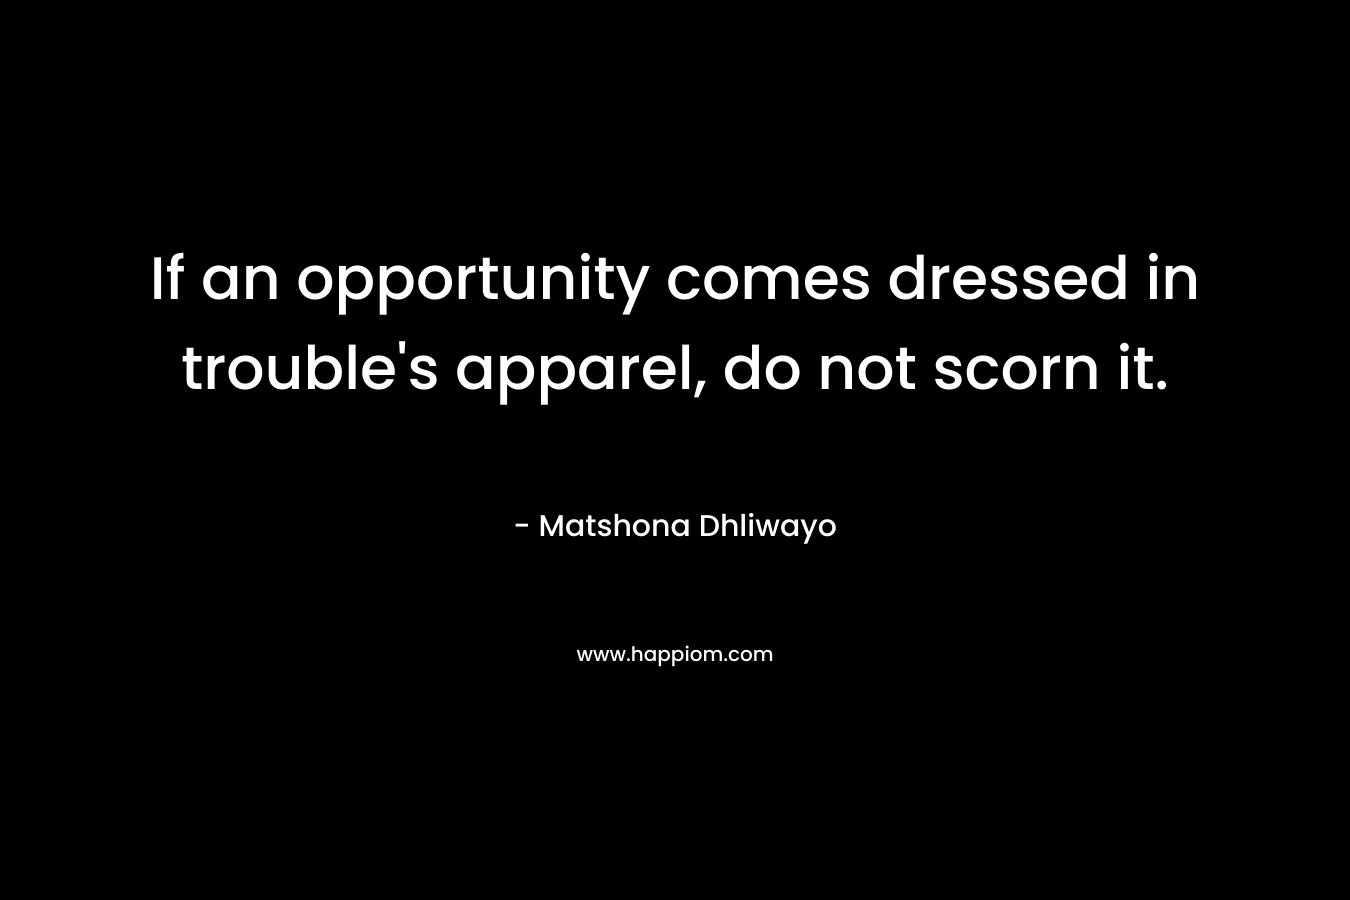 If an opportunity comes dressed in trouble's apparel, do not scorn it.